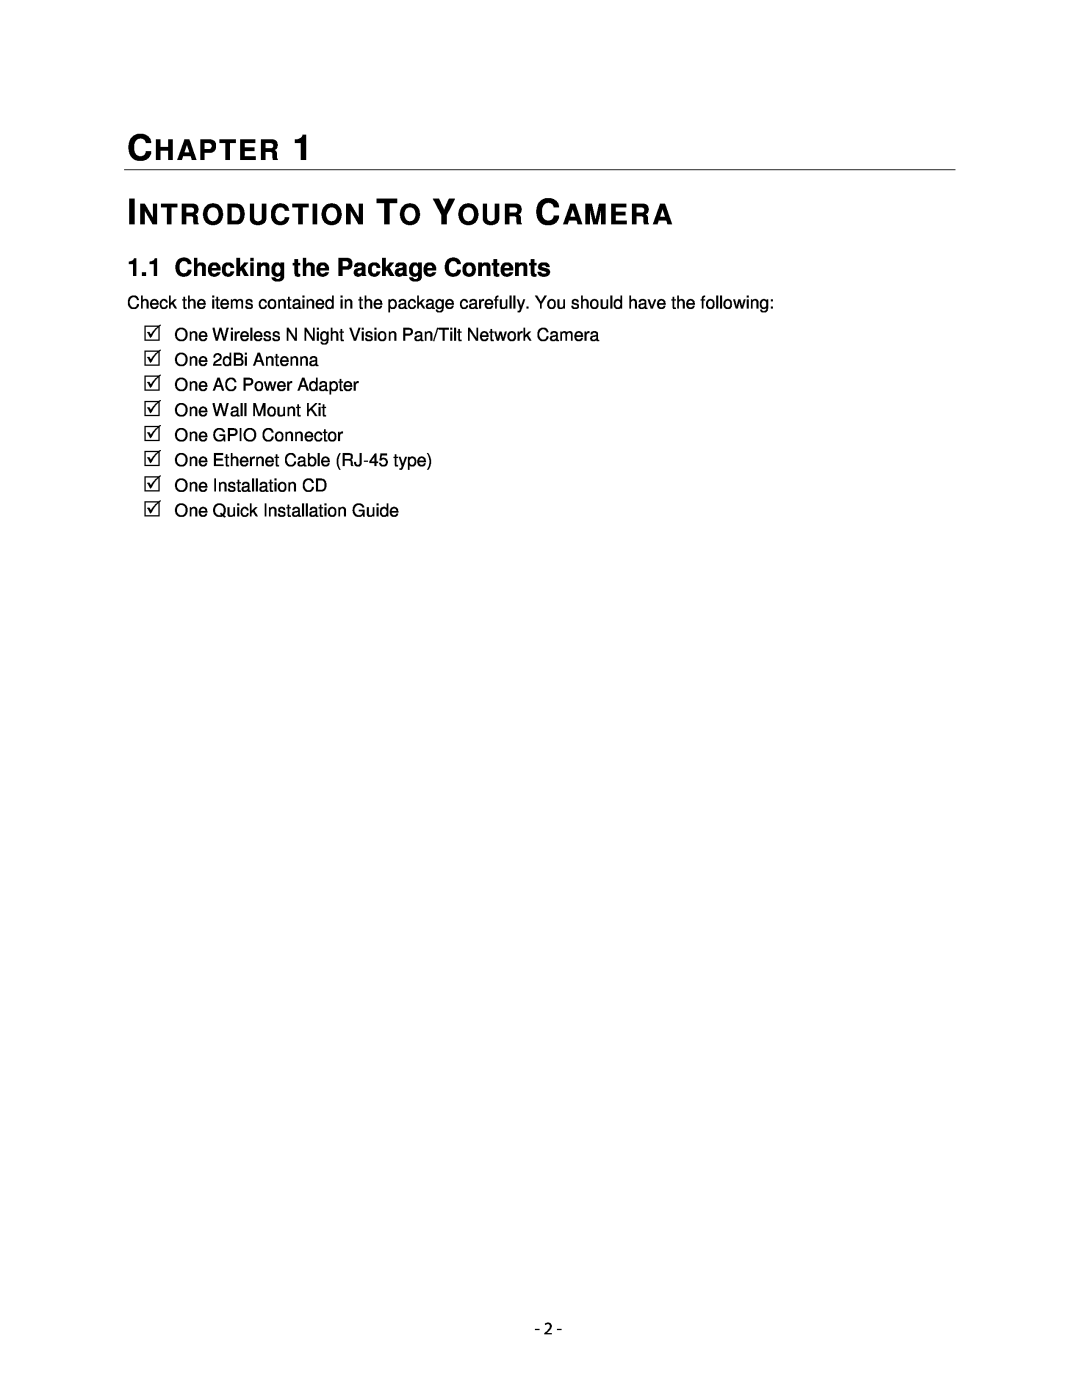 Airlink101 AICN1747W user manual Ch Apter, Introduction To Your Camera, Checking the Package Contents 